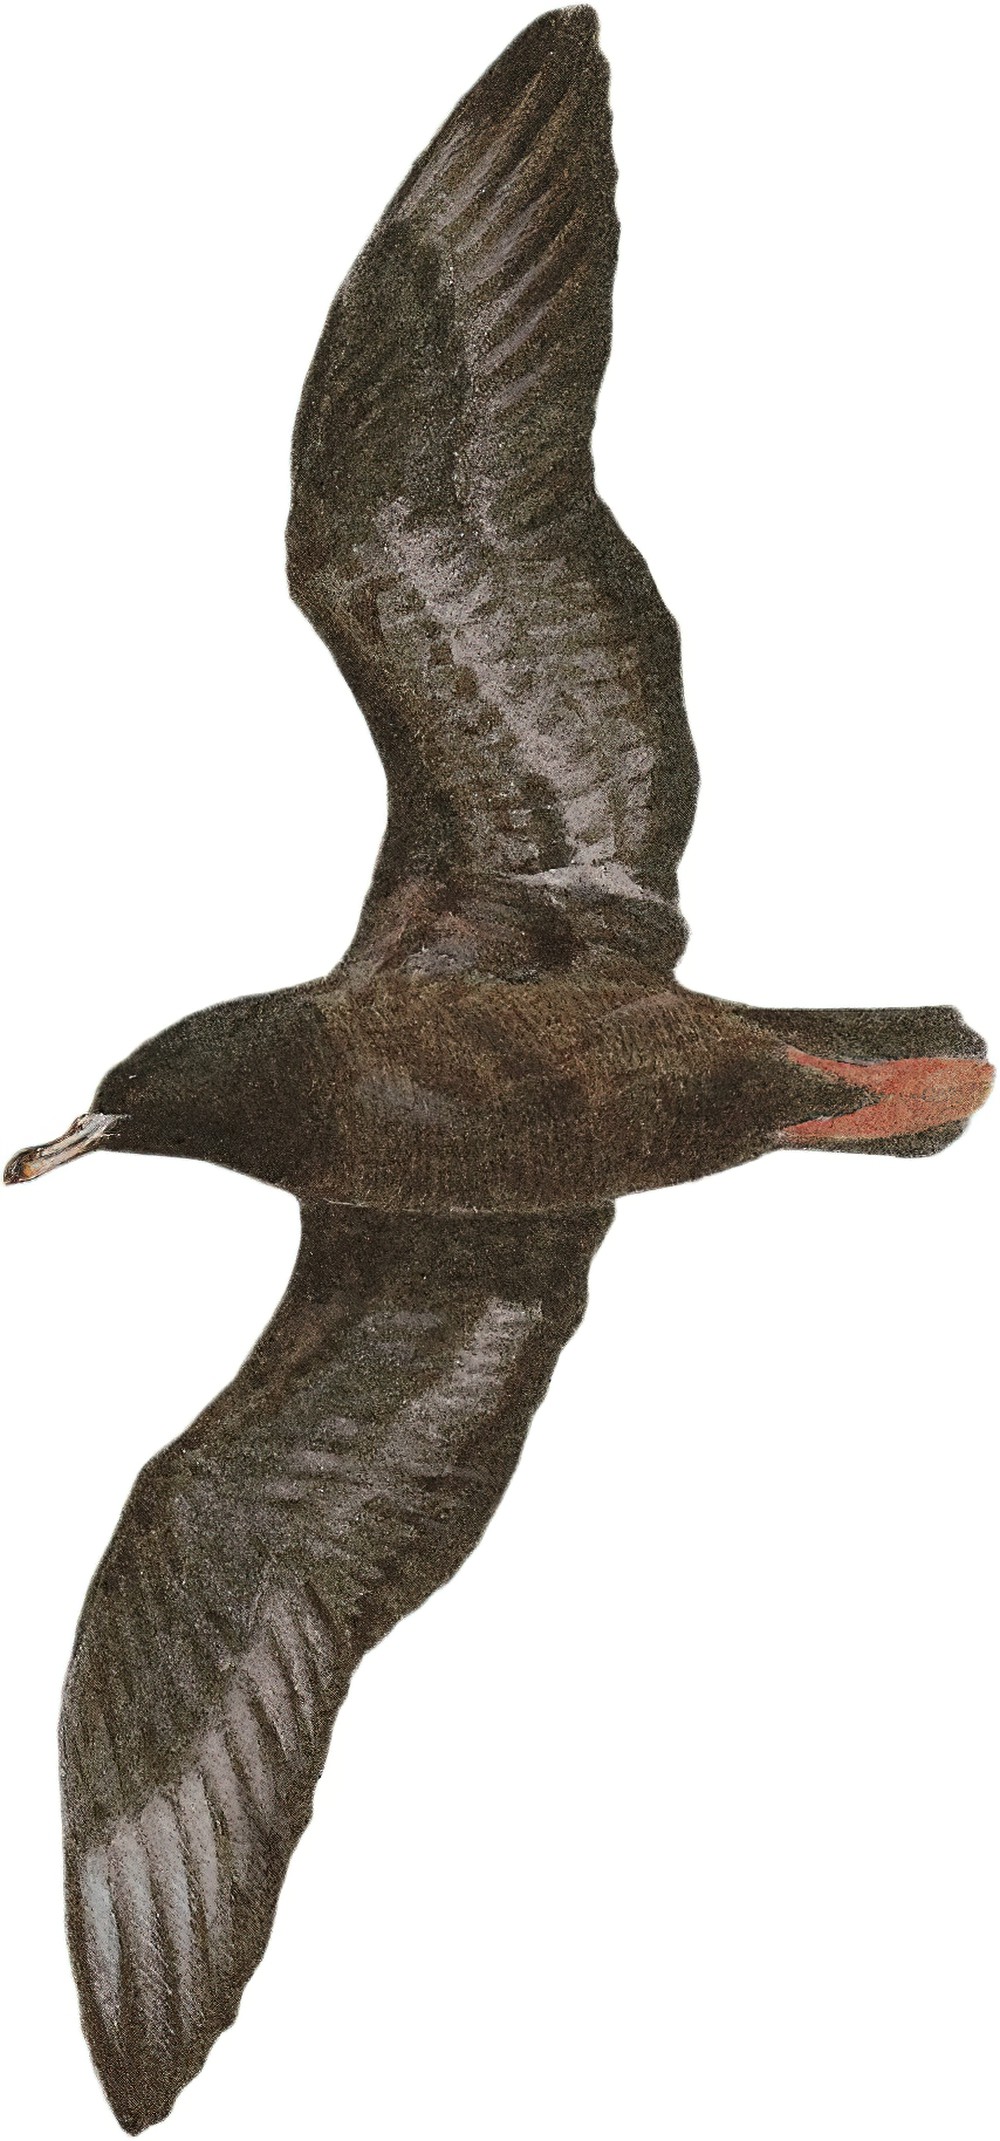 Flesh-footed Shearwater / Ardenna carneipes